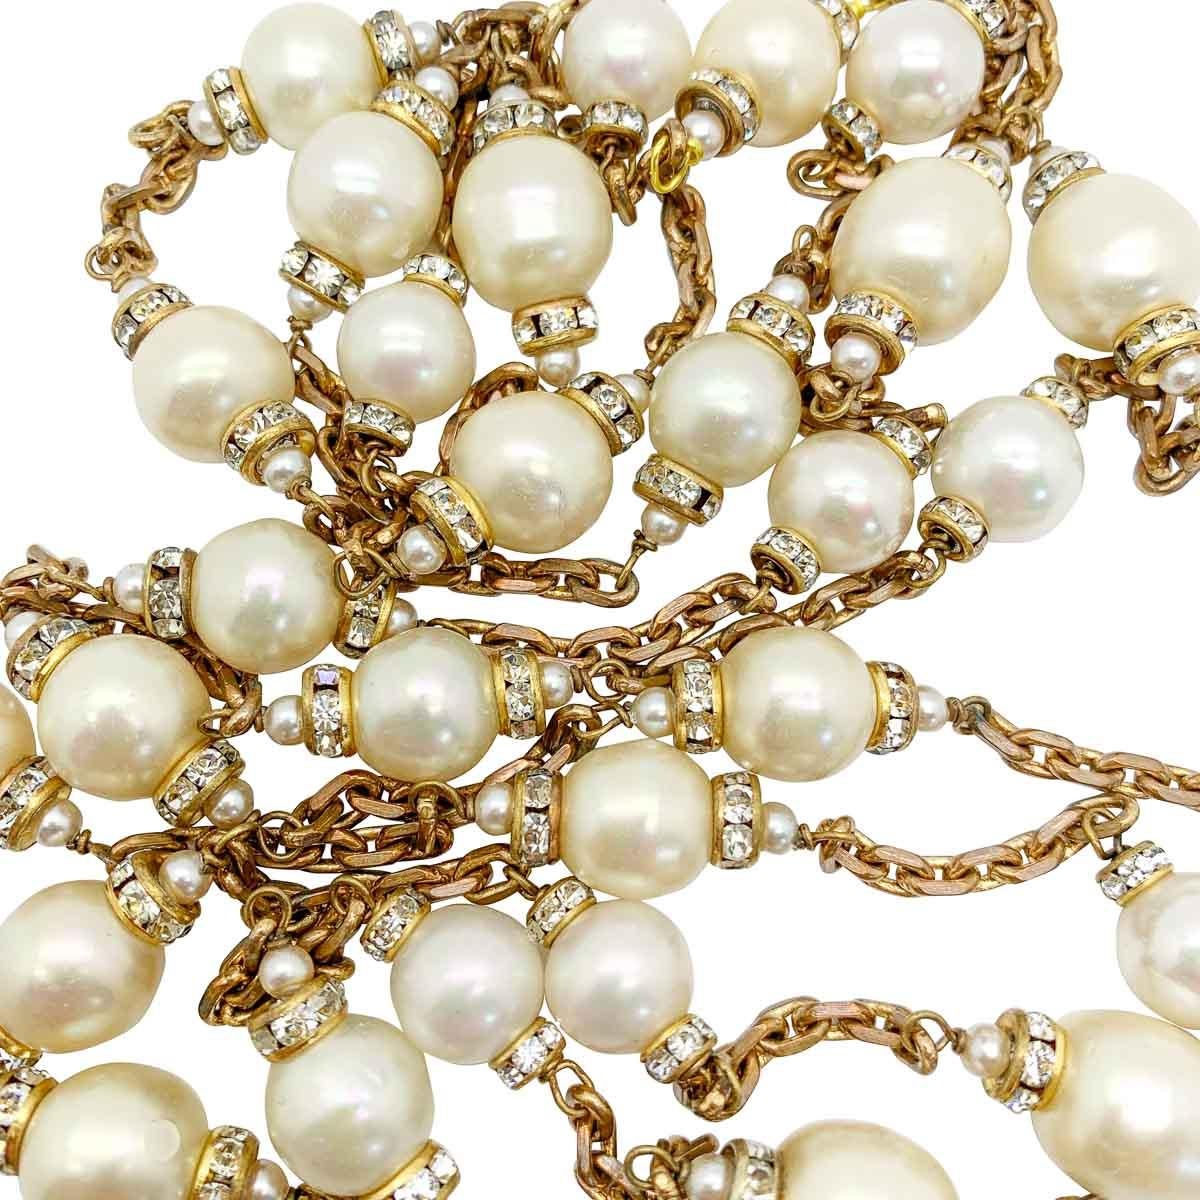 A 1960s vintage Chanel pearl sautoir necklace attributed to Chanel (unsigned) which would have been made most likely by Maison Gripoix, Paris for the House whilst Coco Chanel was alive and heading her eponymous House. A sublime long baroque pearl